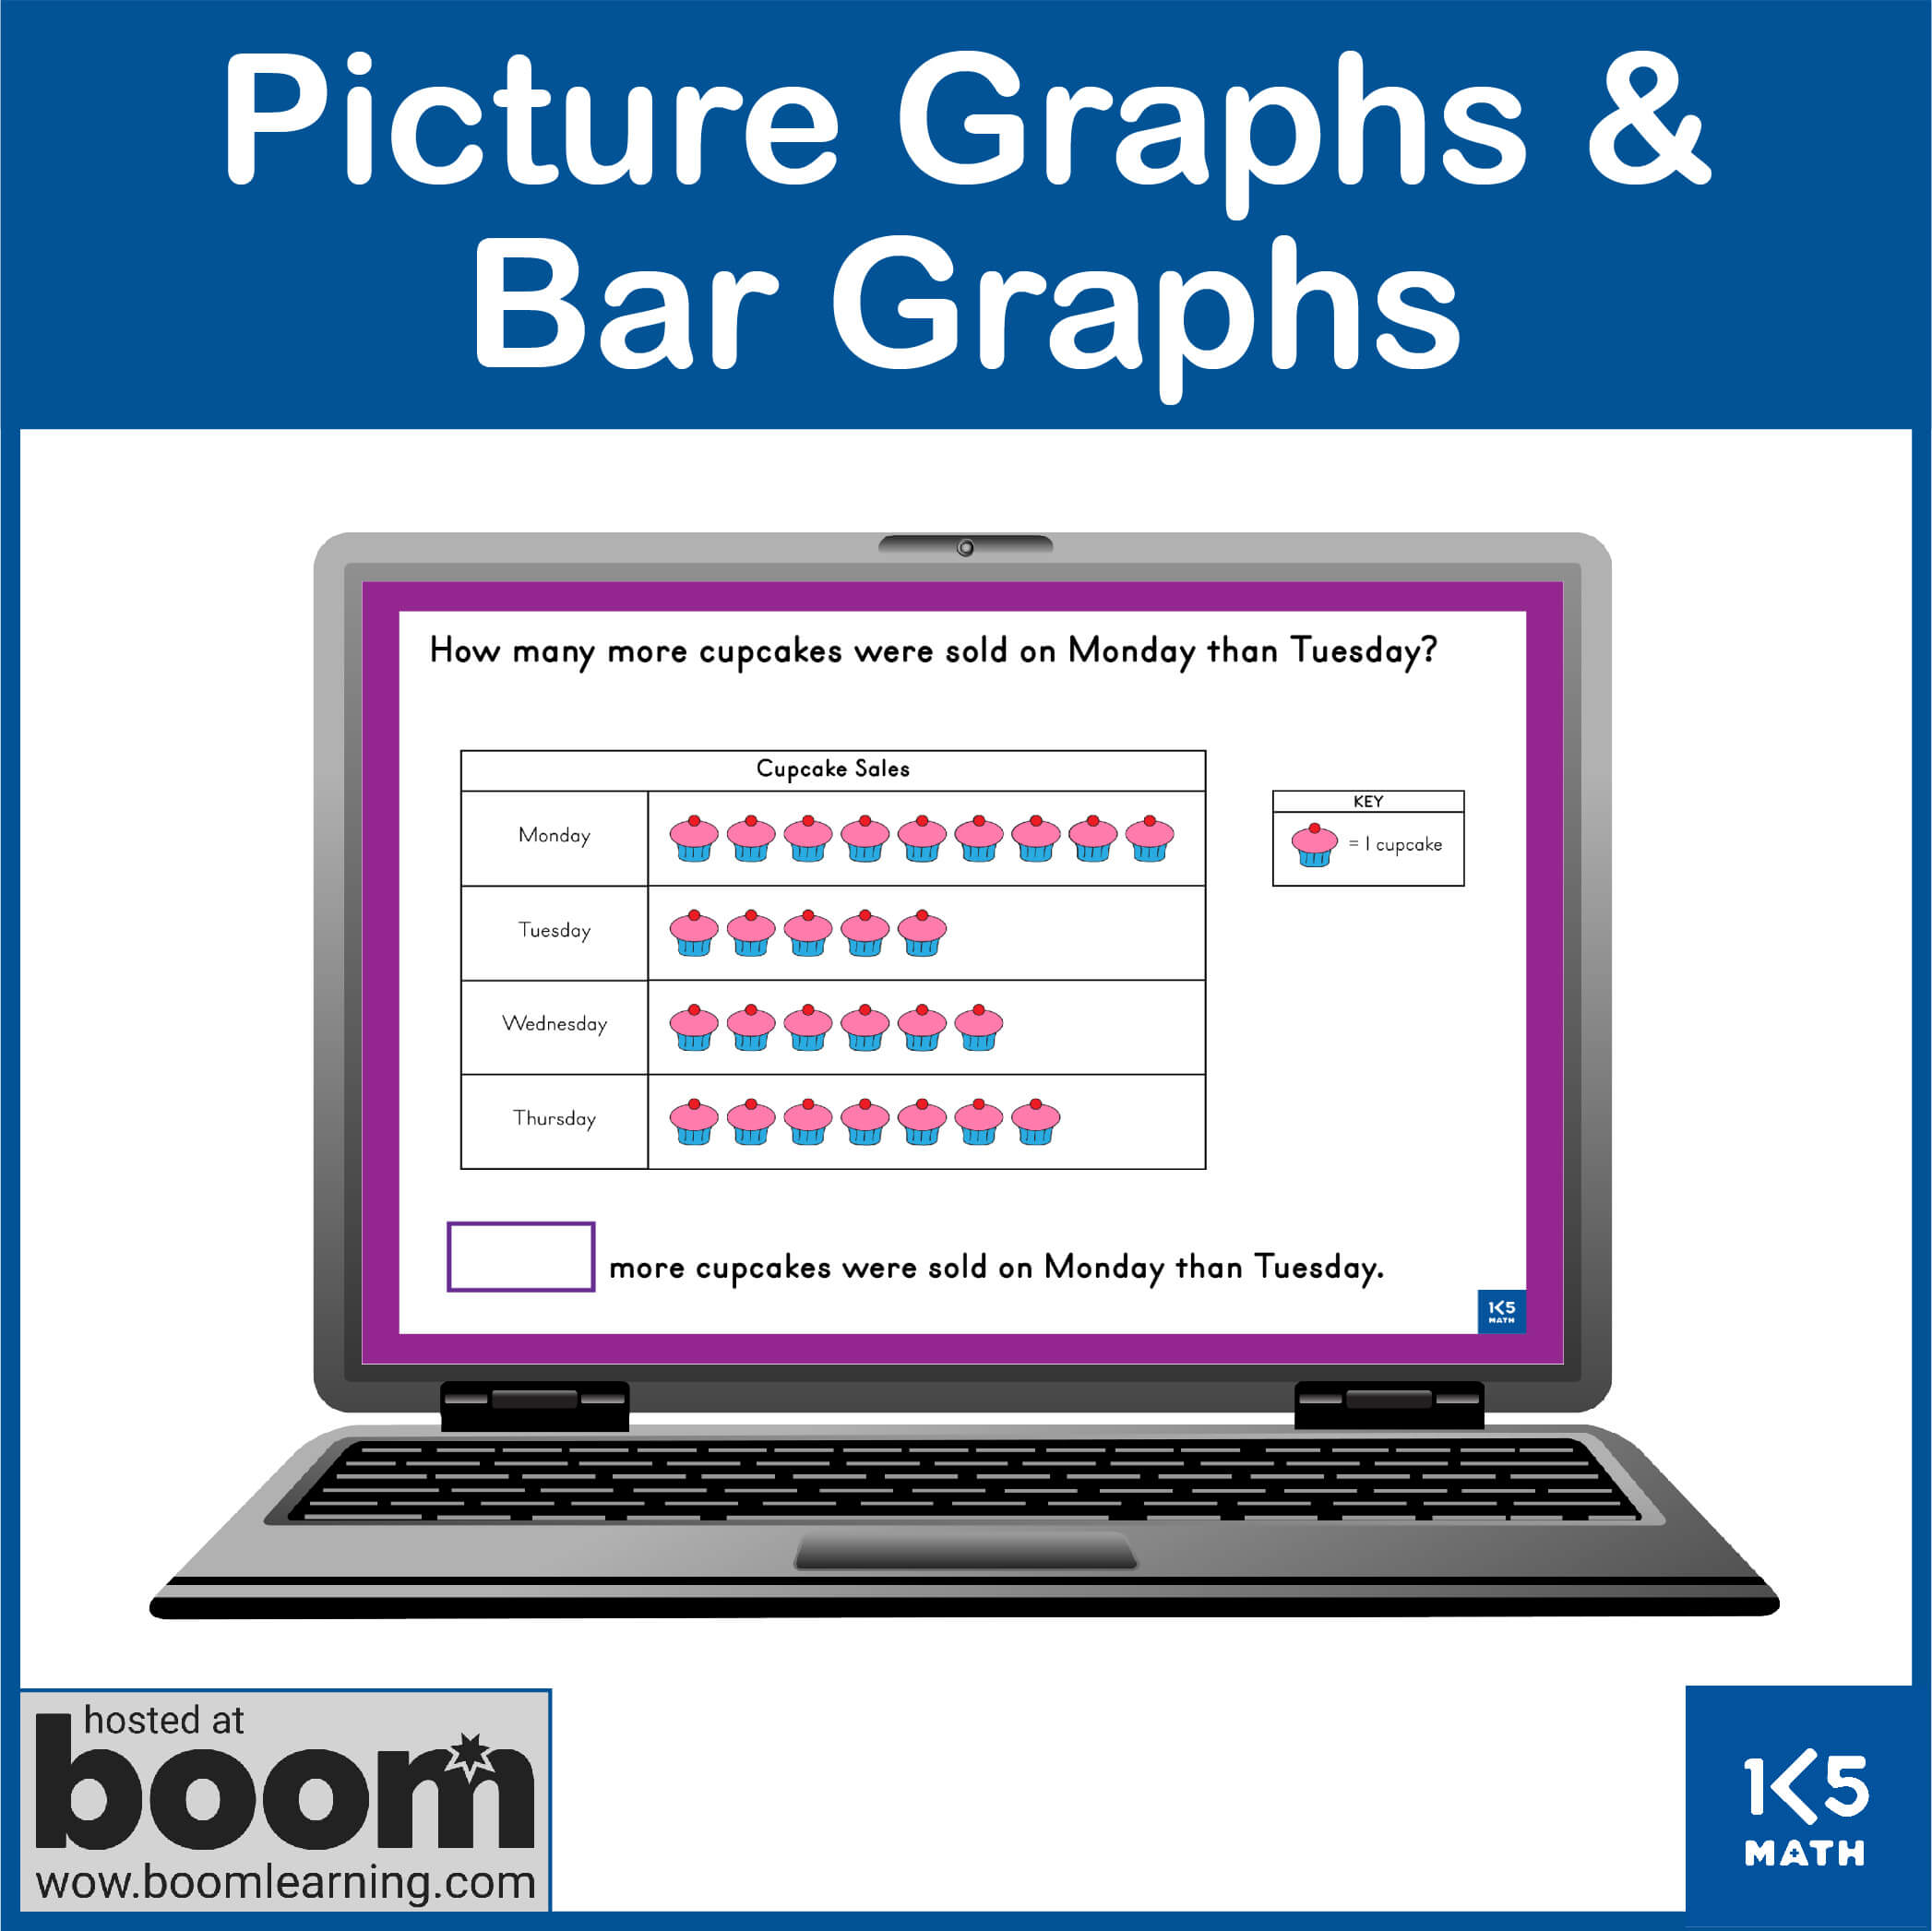 Boom: Picture Graphs and Bar Graphs